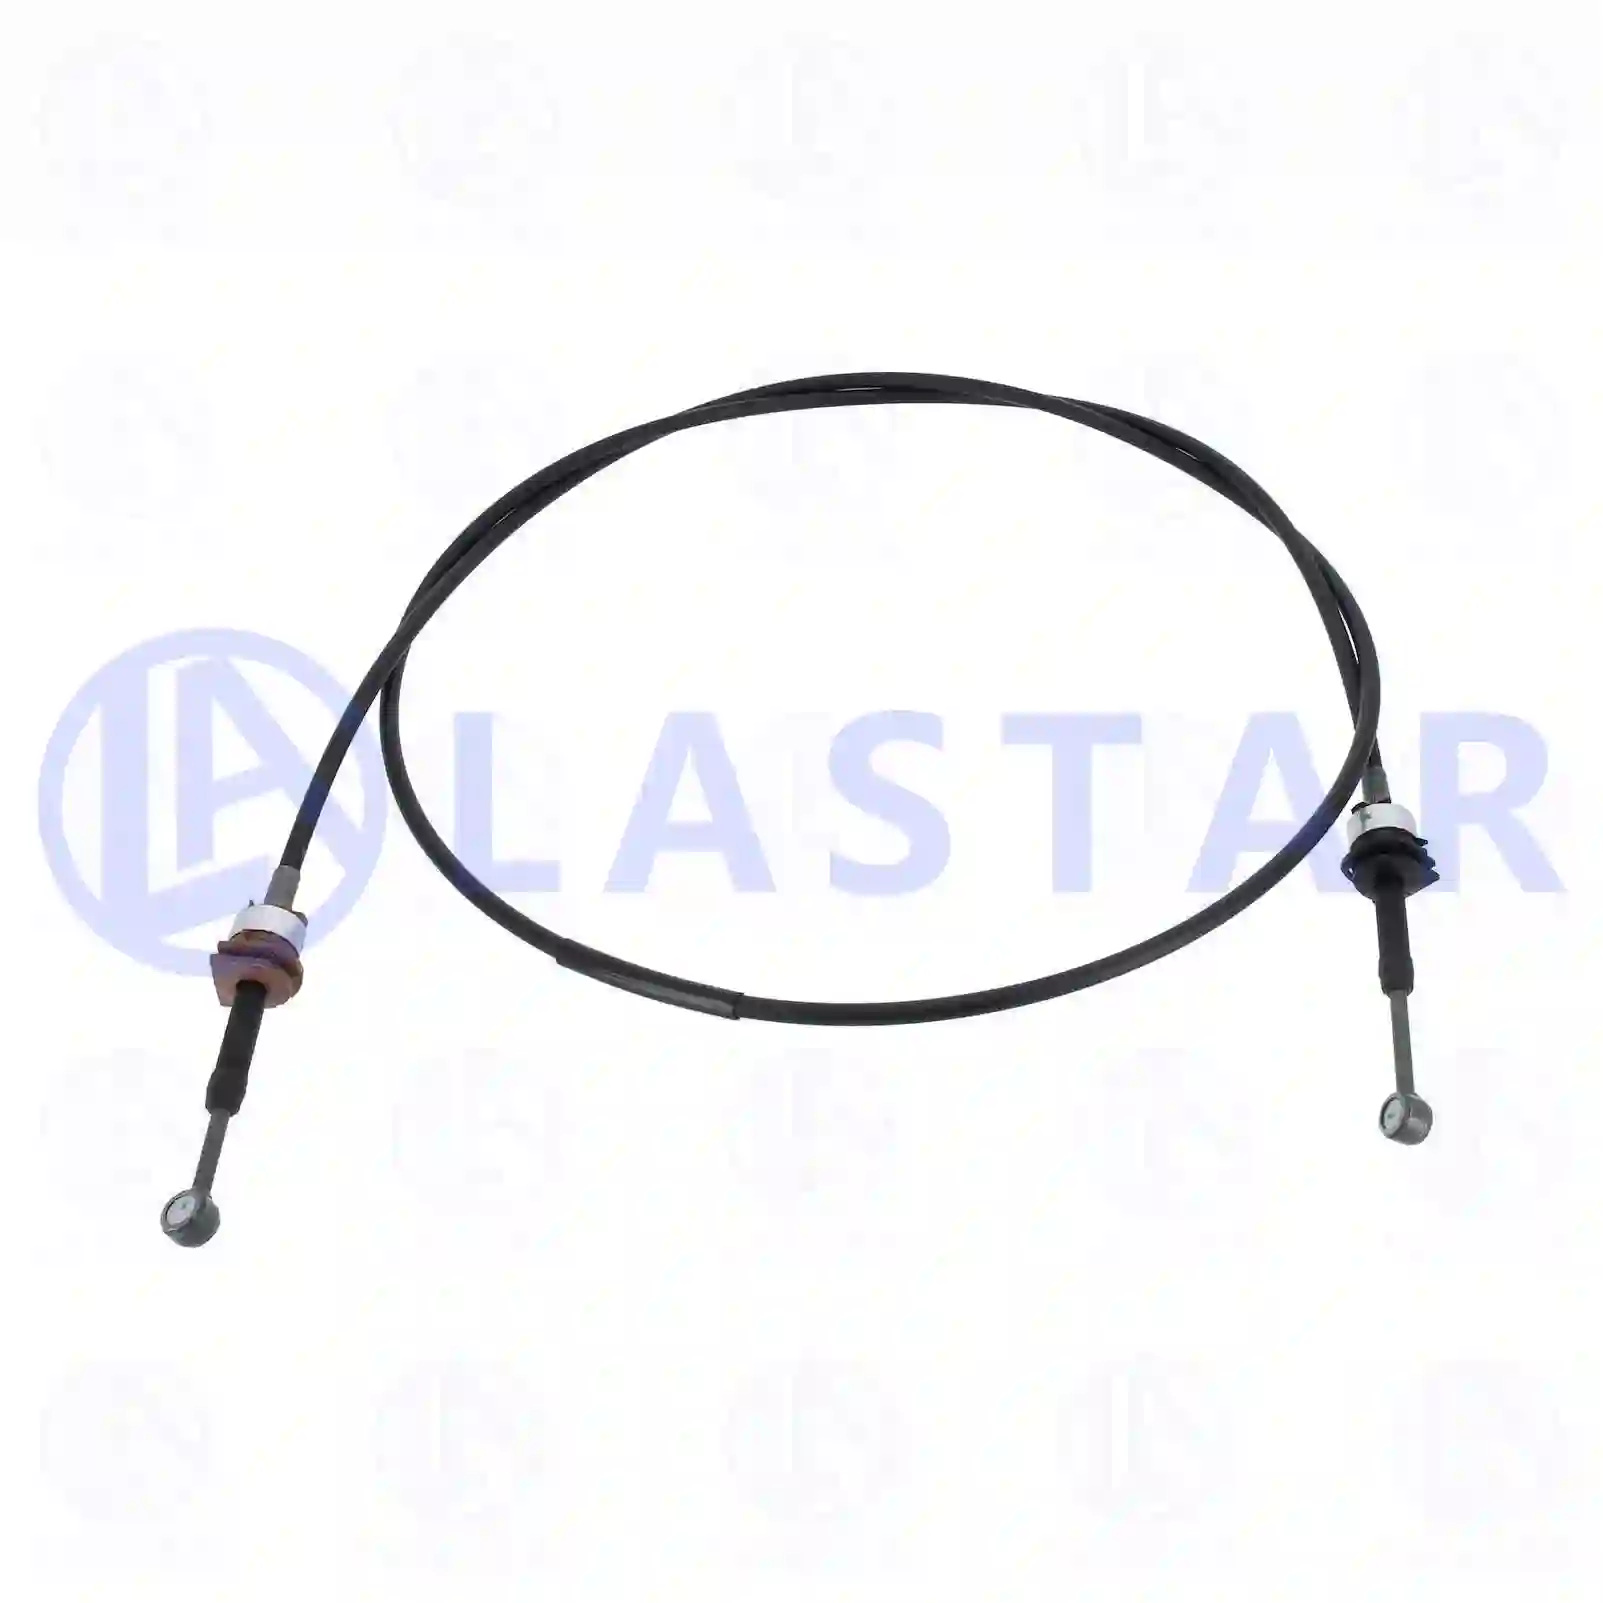 Control cable, switching, 77732095, 20545966, 20700966, 21002866, 21789684 ||  77732095 Lastar Spare Part | Truck Spare Parts, Auotomotive Spare Parts Control cable, switching, 77732095, 20545966, 20700966, 21002866, 21789684 ||  77732095 Lastar Spare Part | Truck Spare Parts, Auotomotive Spare Parts